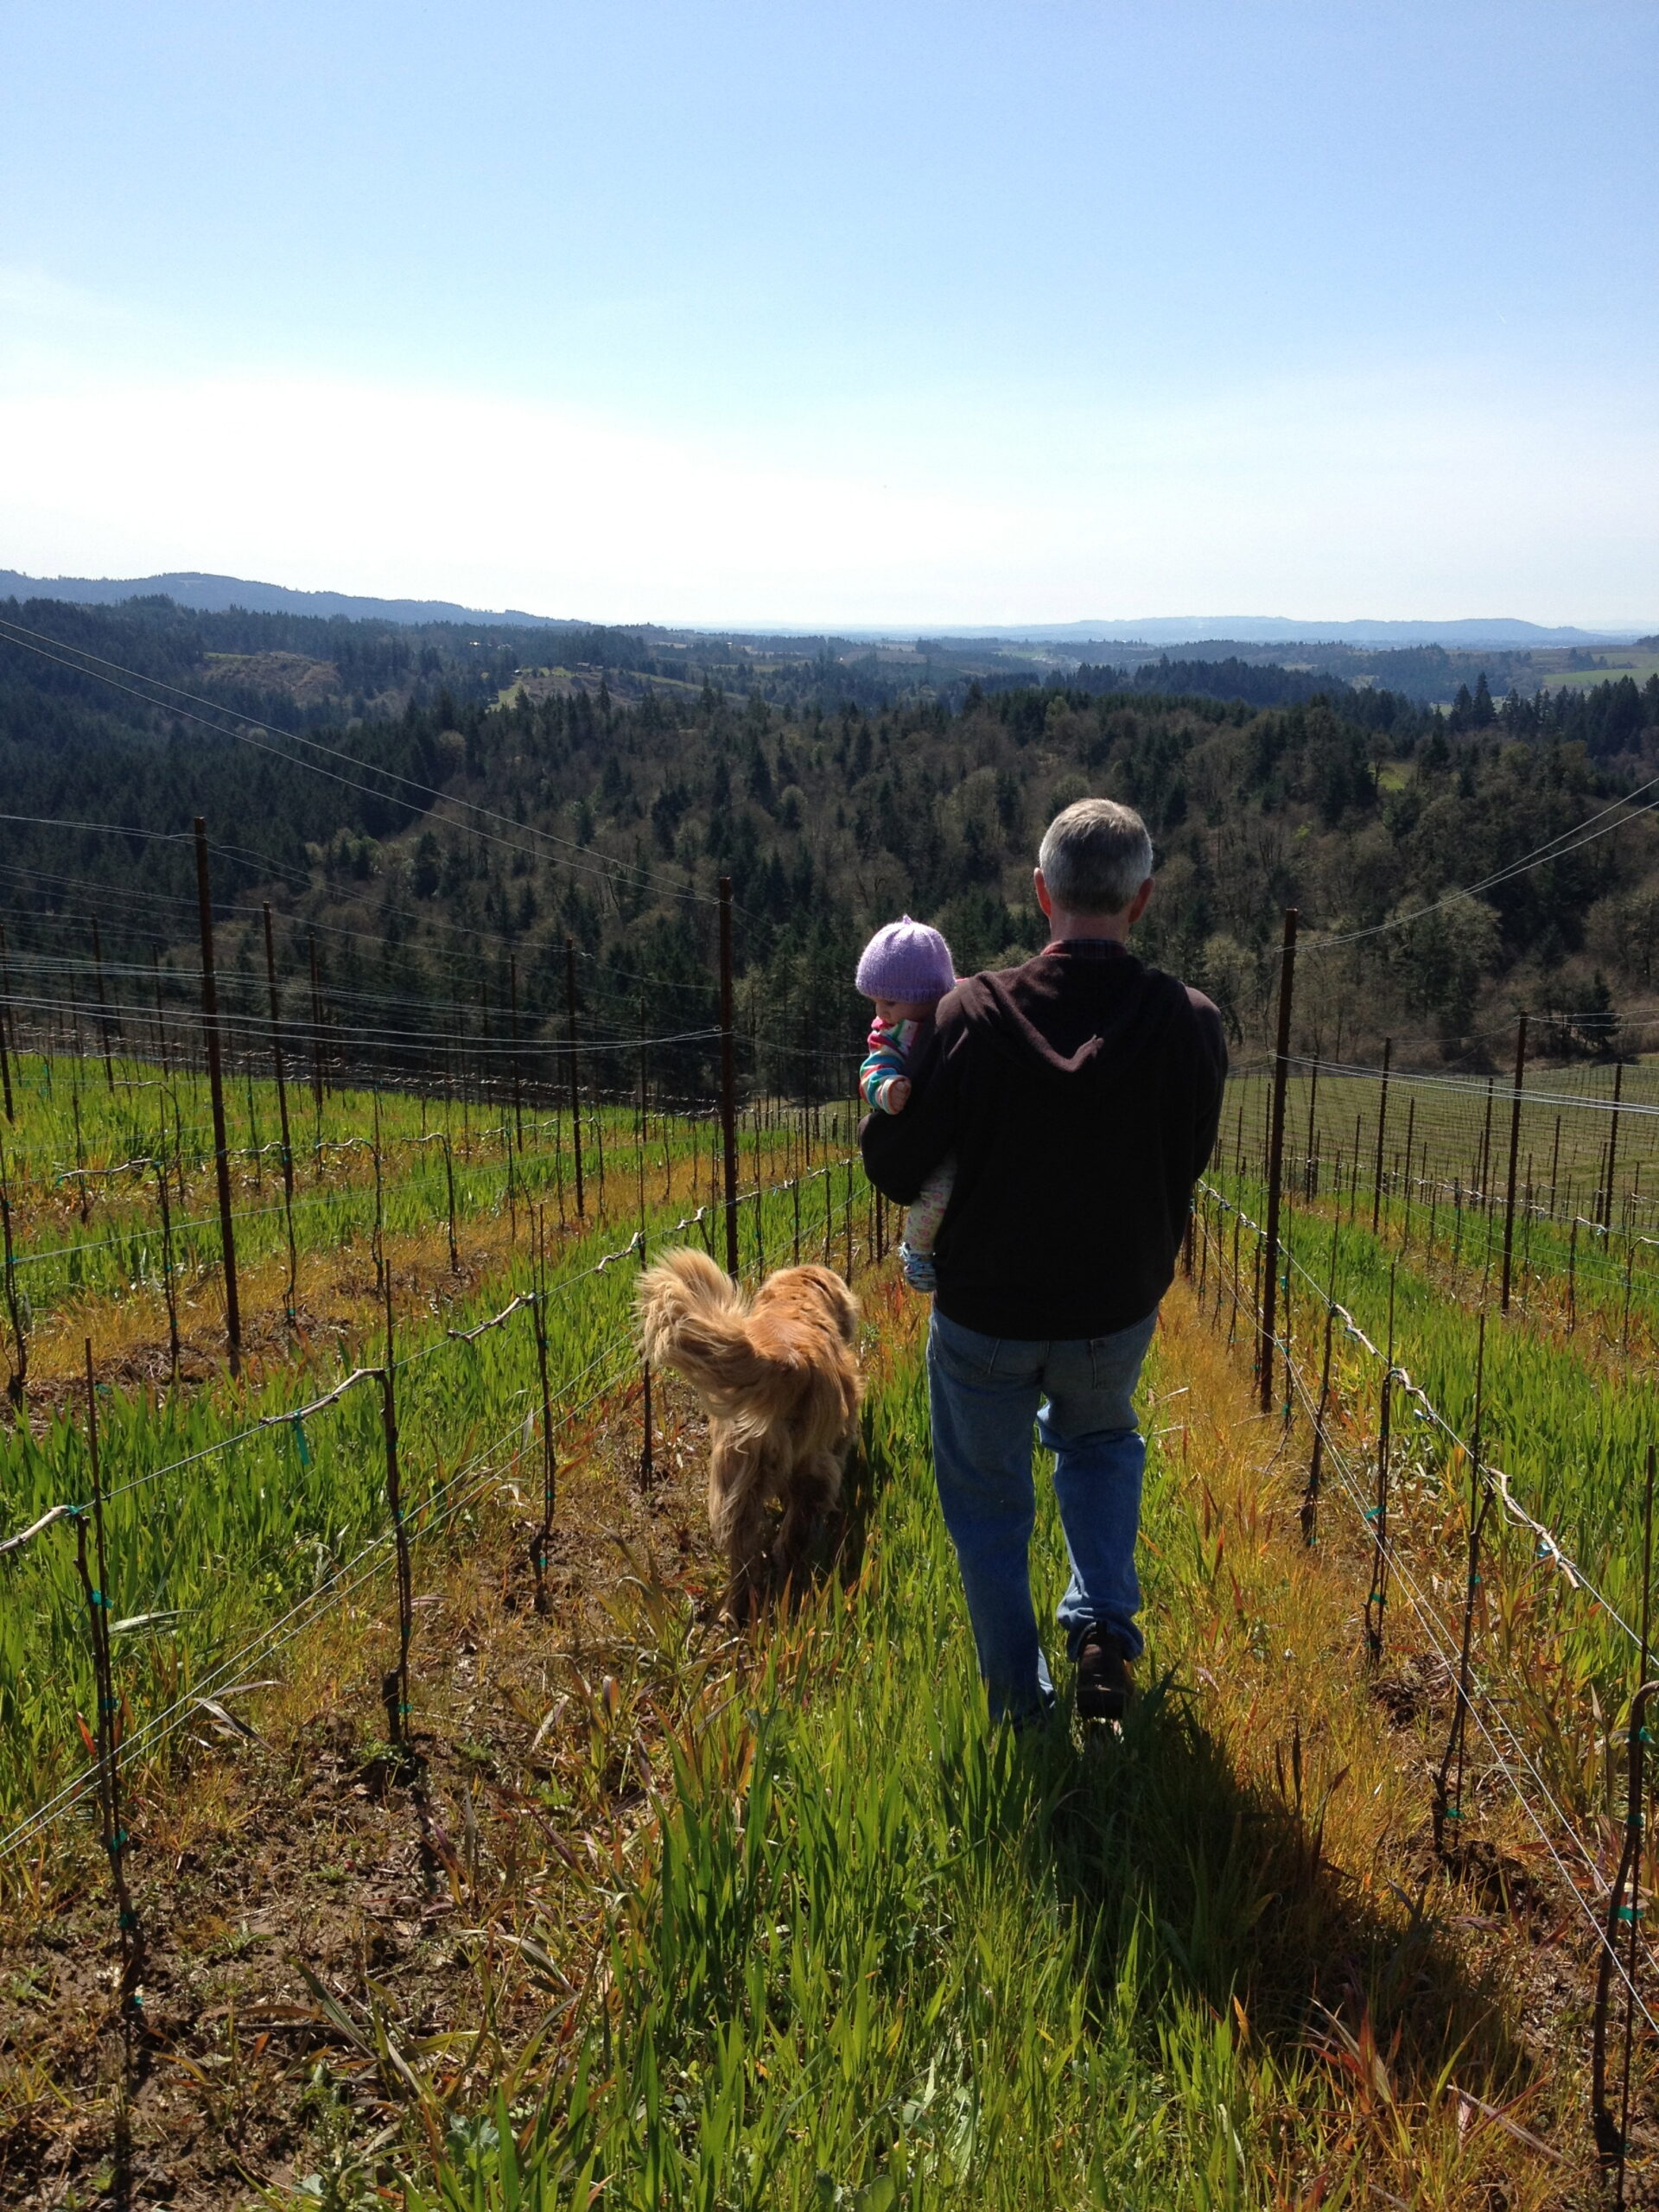 Fairsing Vineyard owner walks with grandchild and dog among the vines and trees